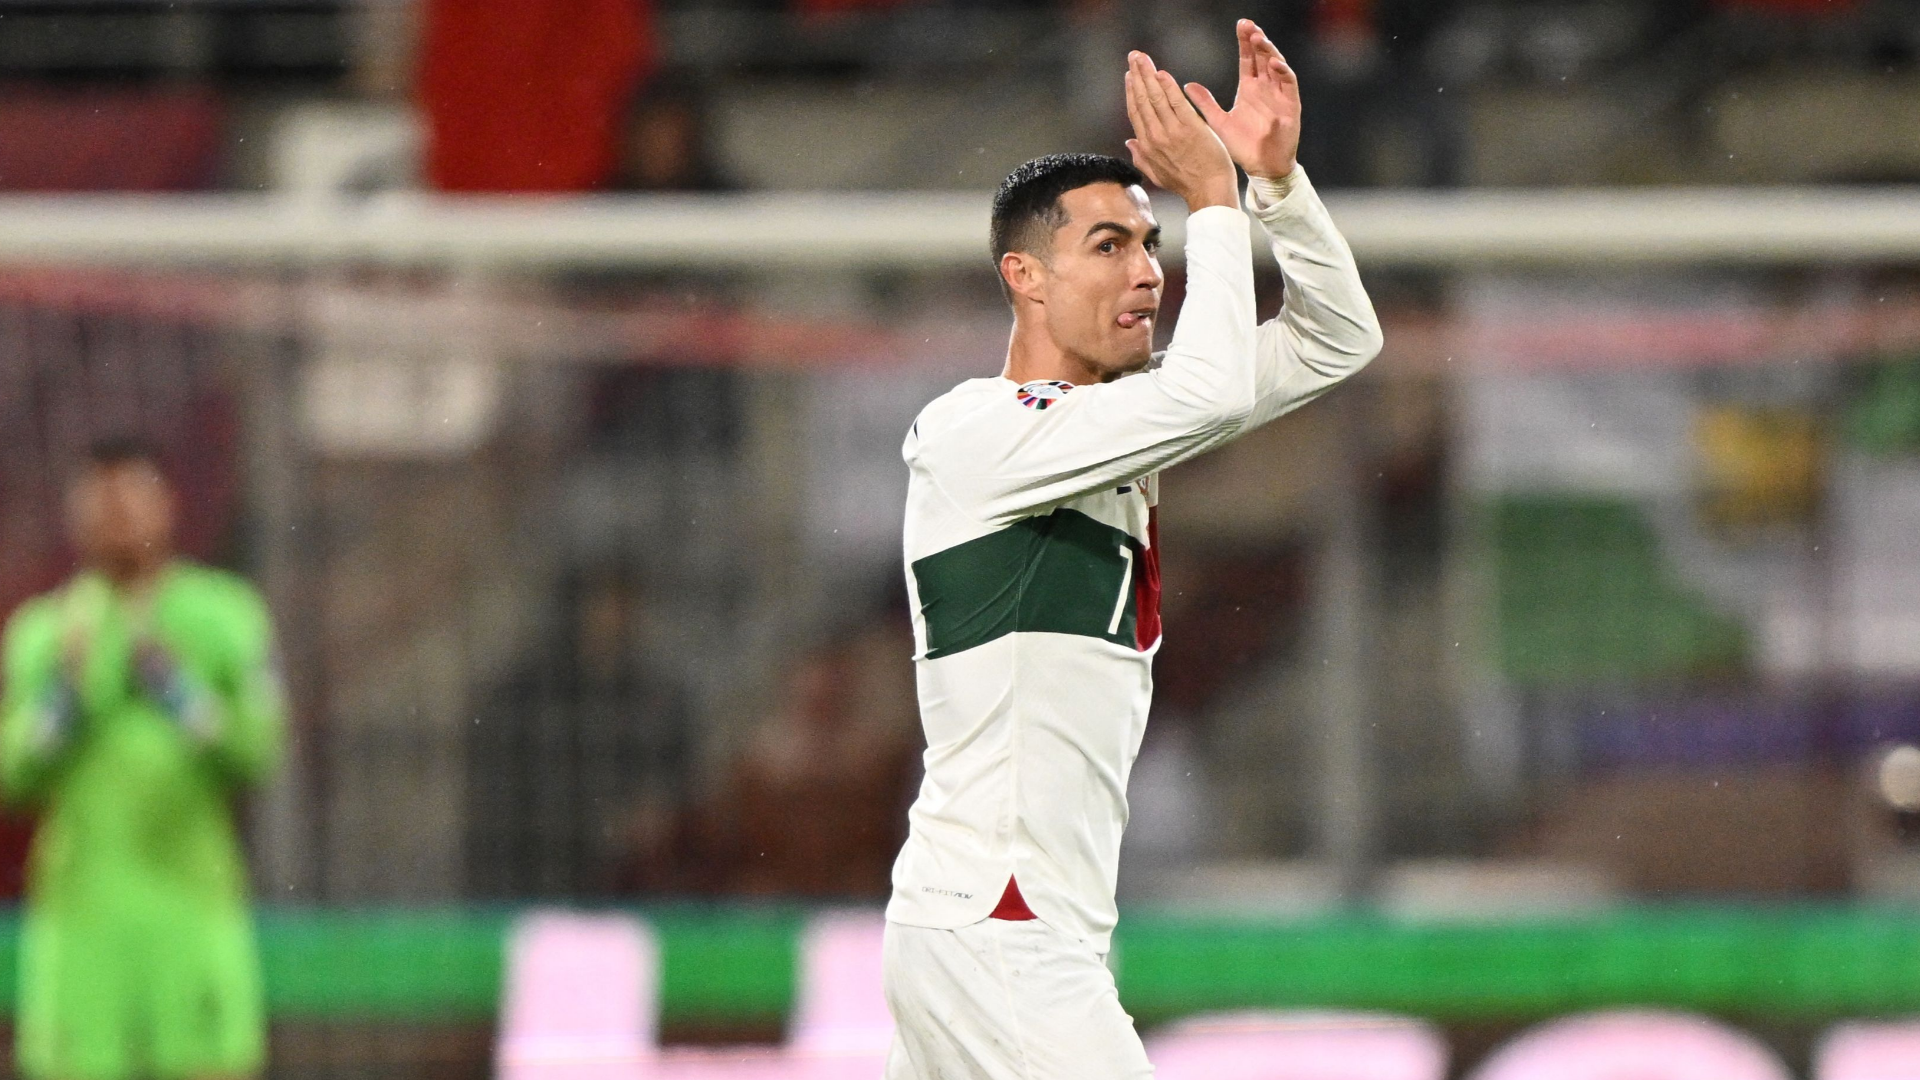 Portugal player ratings vs Liechtenstein: Cristiano Ronaldo answers critics  with brace and Joao Cancelo gets much-needed goal